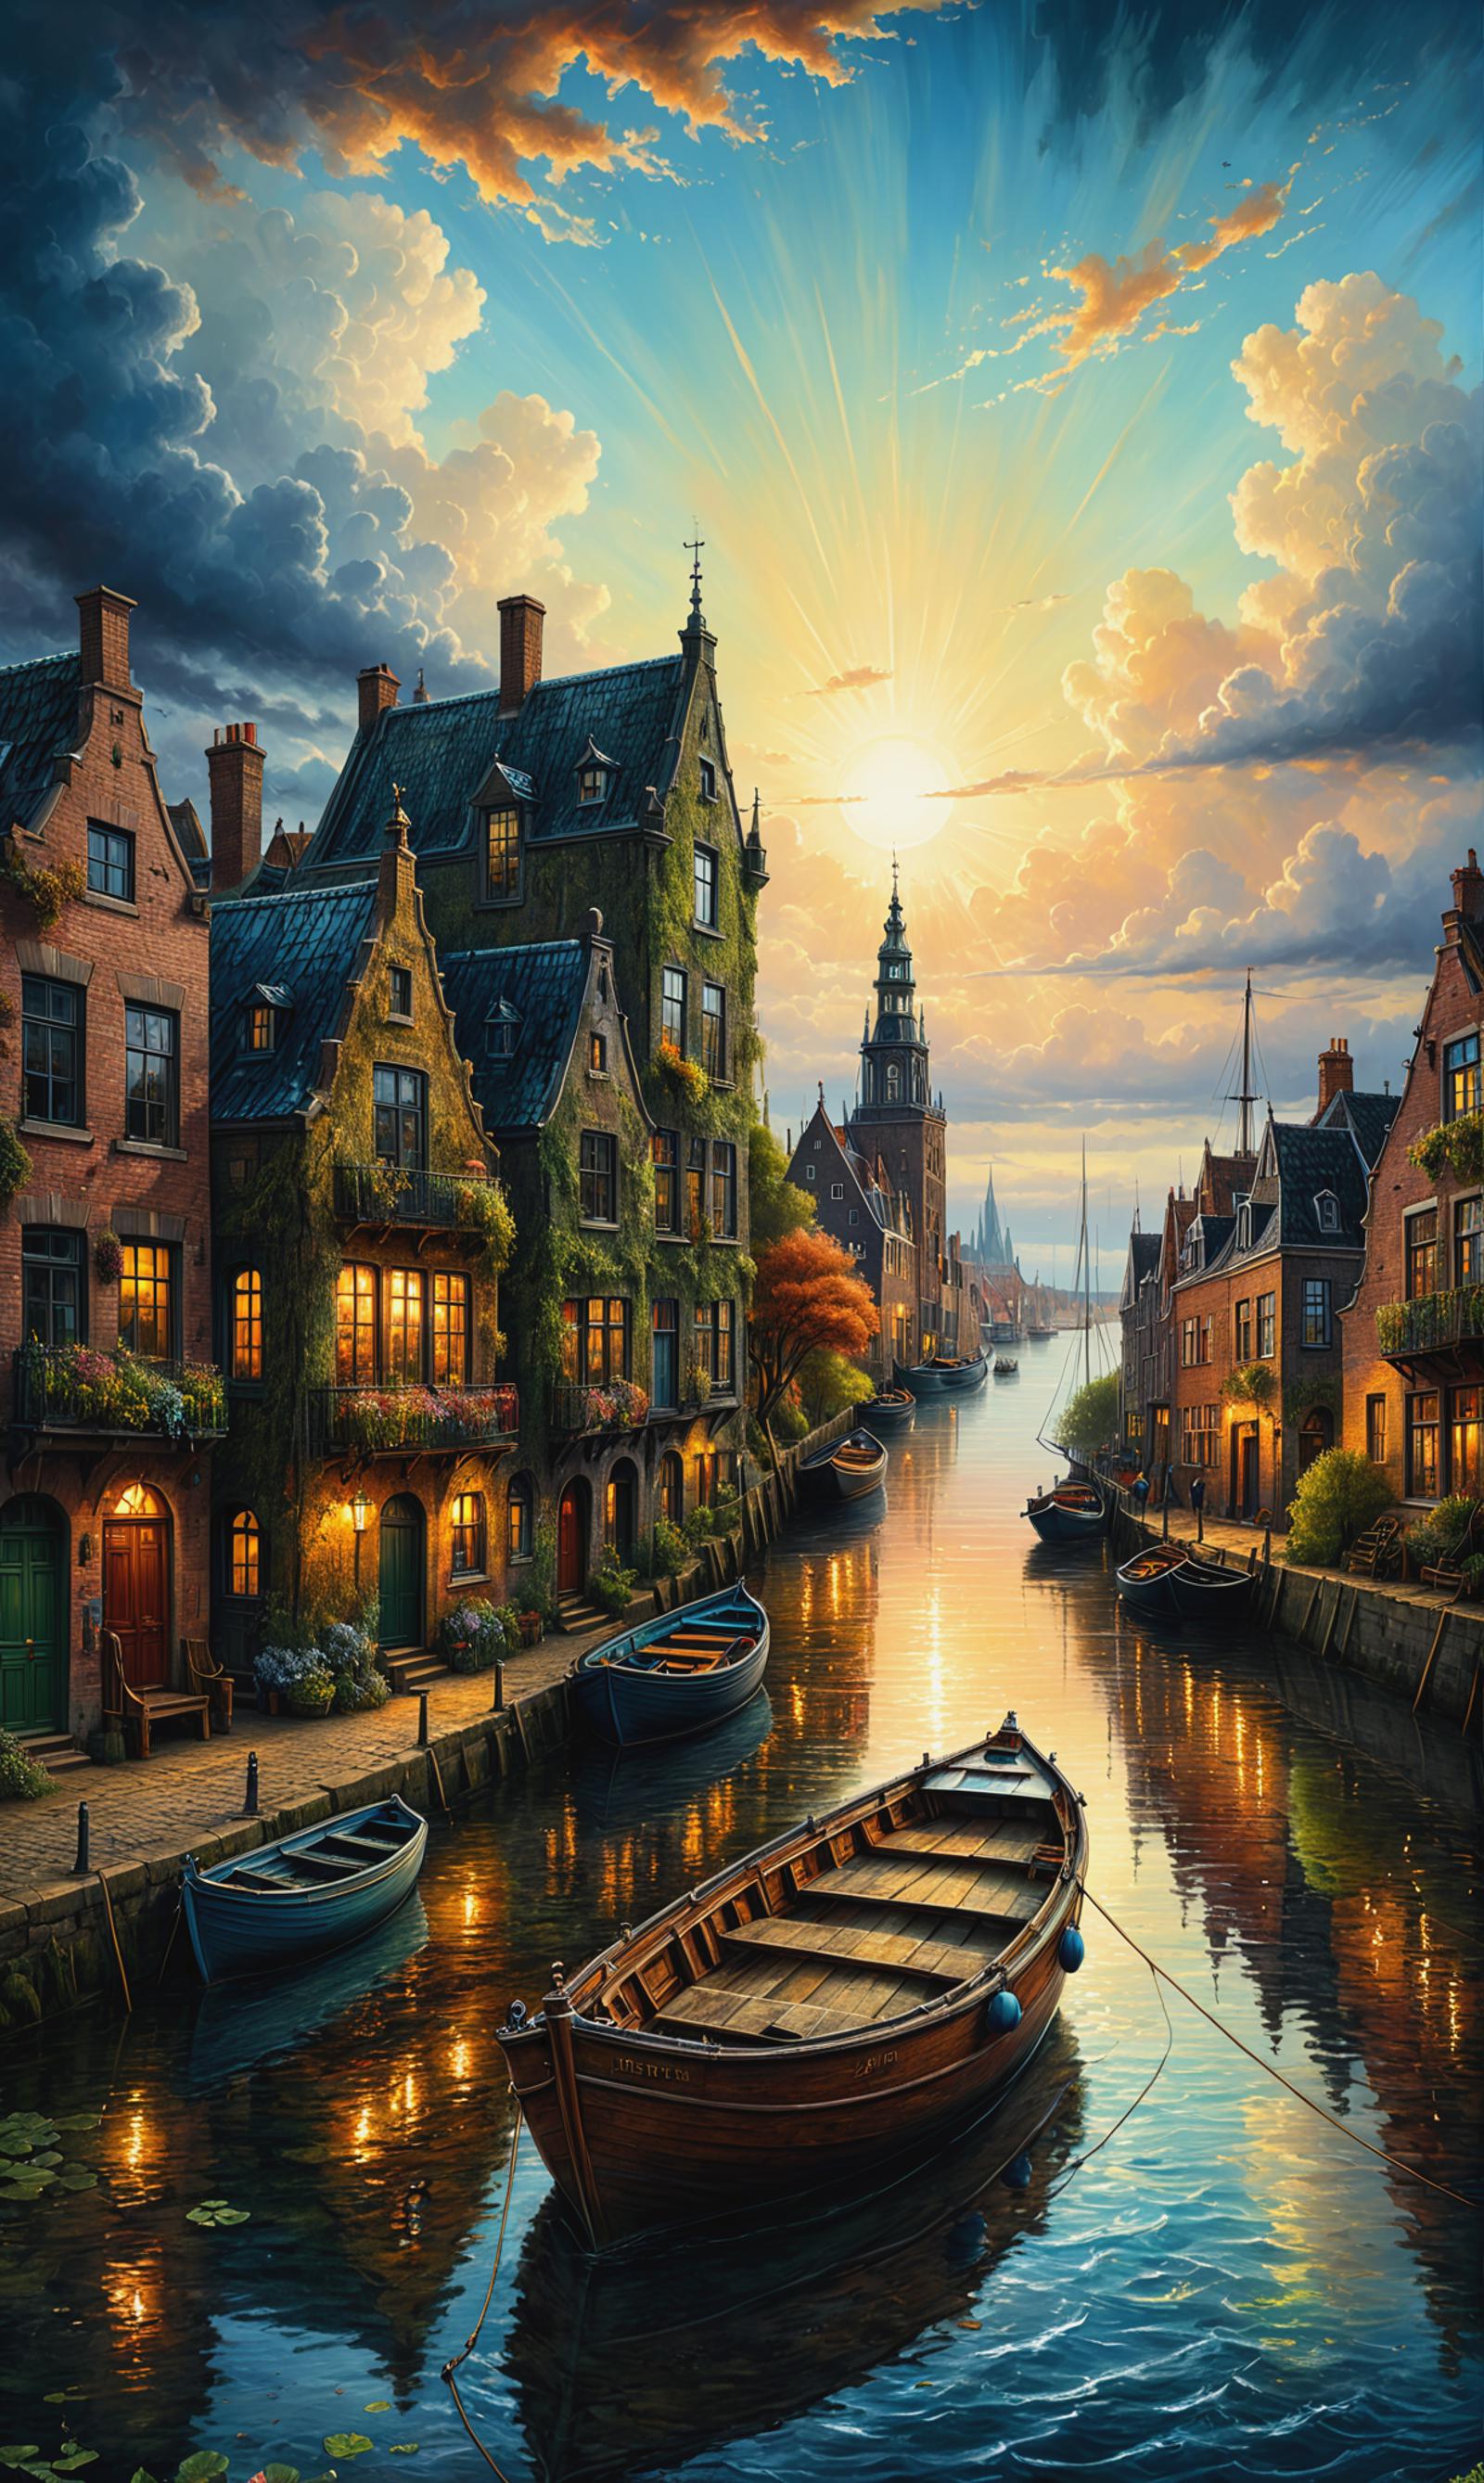 A Painting of a Town with Boats and the Sun Shining through the Clouds